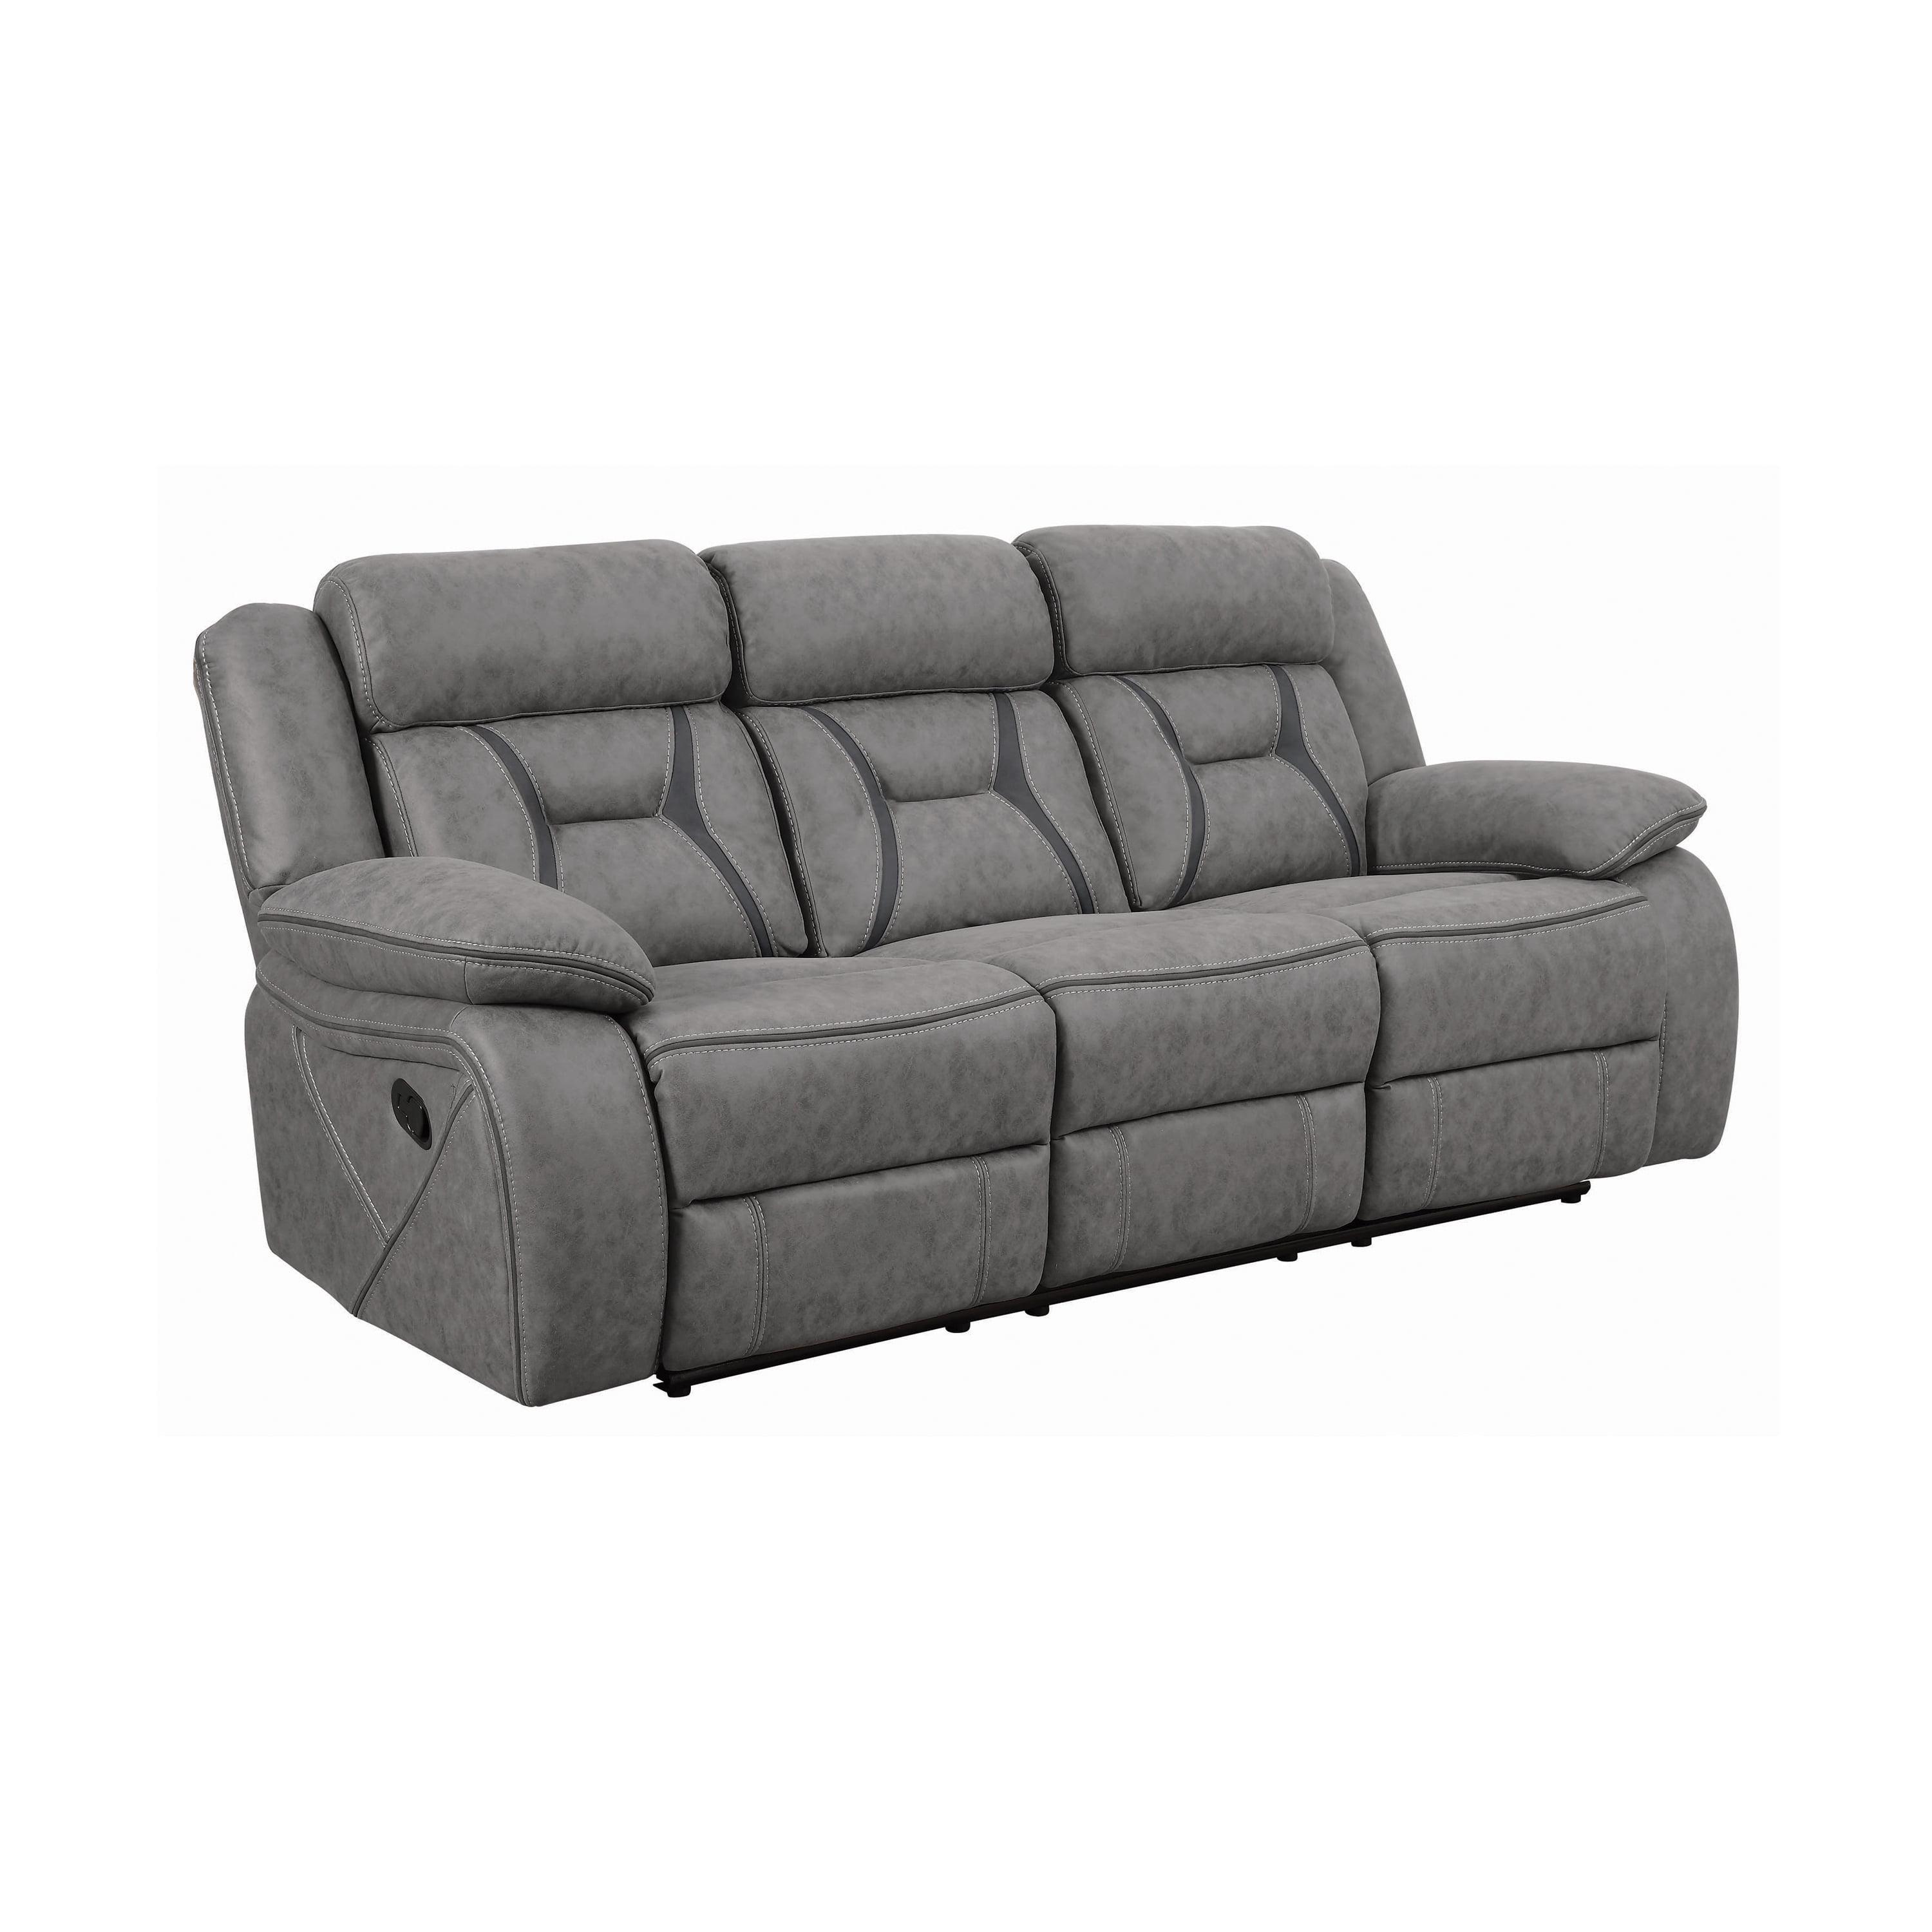 Houston Collection 84" Gray Faux Leather Reclining Sofa